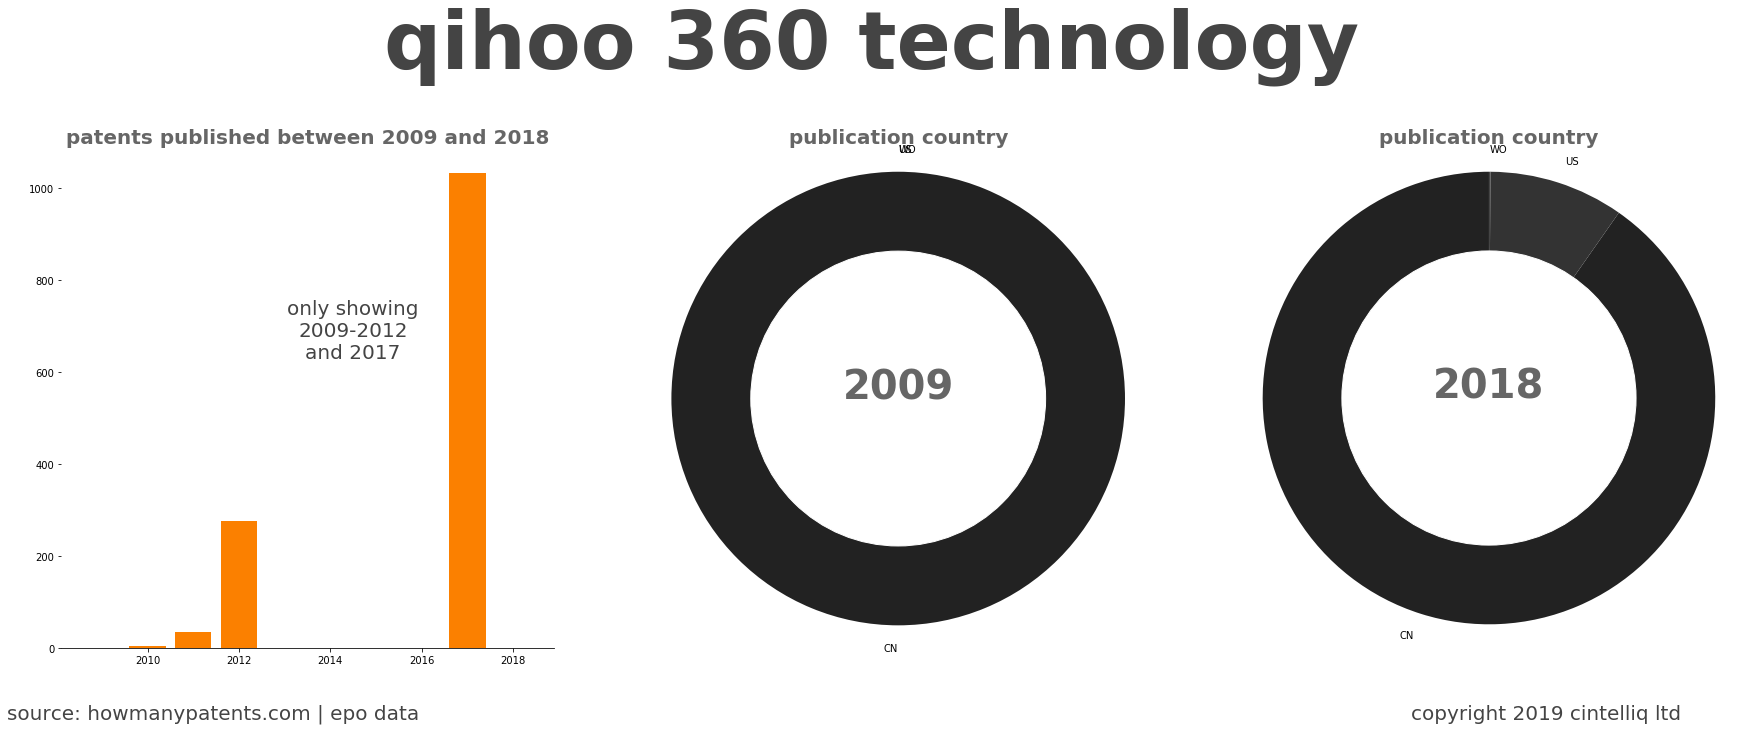 summary of patents for Qihoo 360 Technology